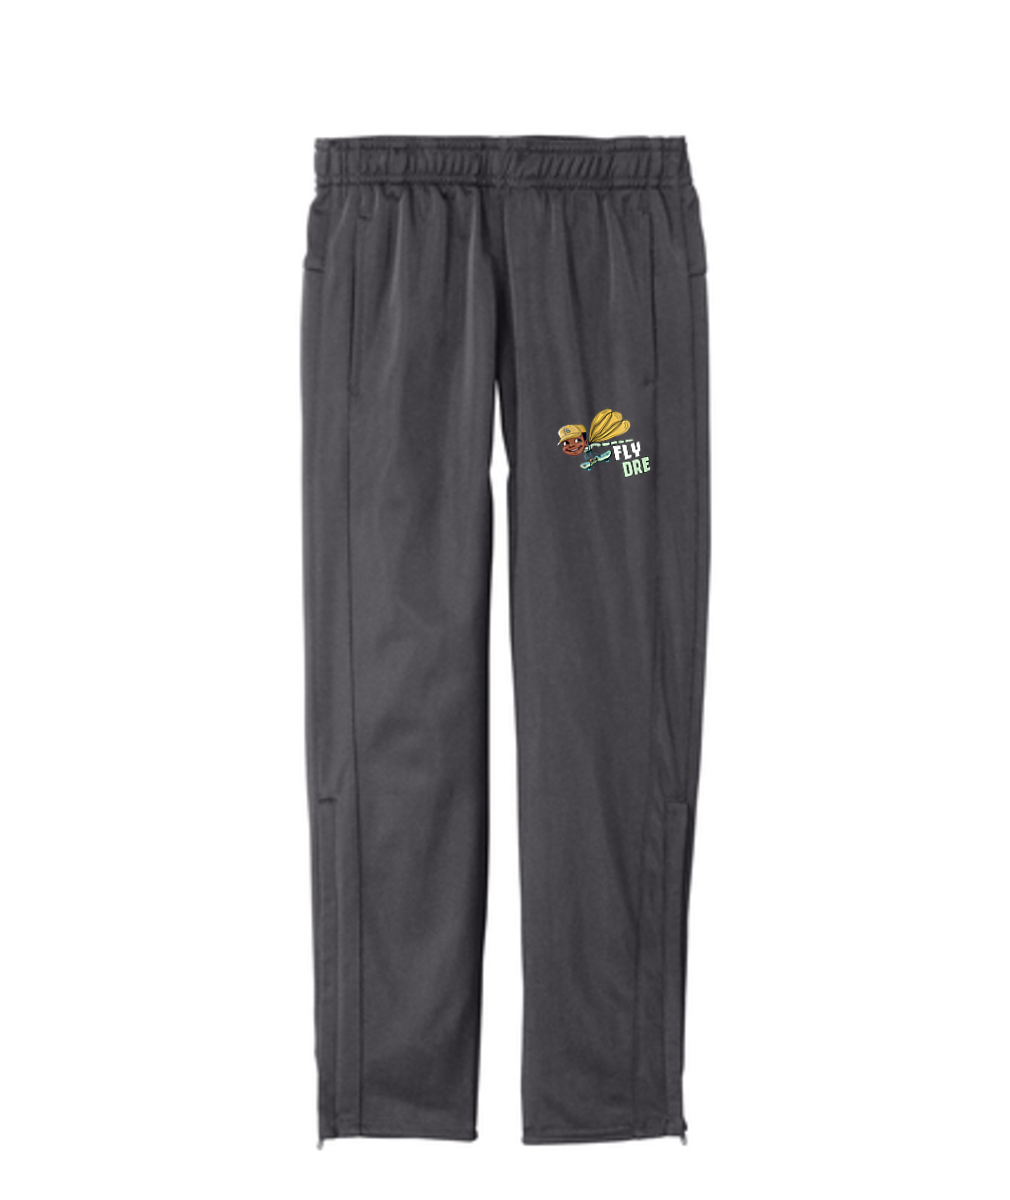 Fly Dre Embroidered Sport-Tek ® Youth Tricot Track Jogger or Similar